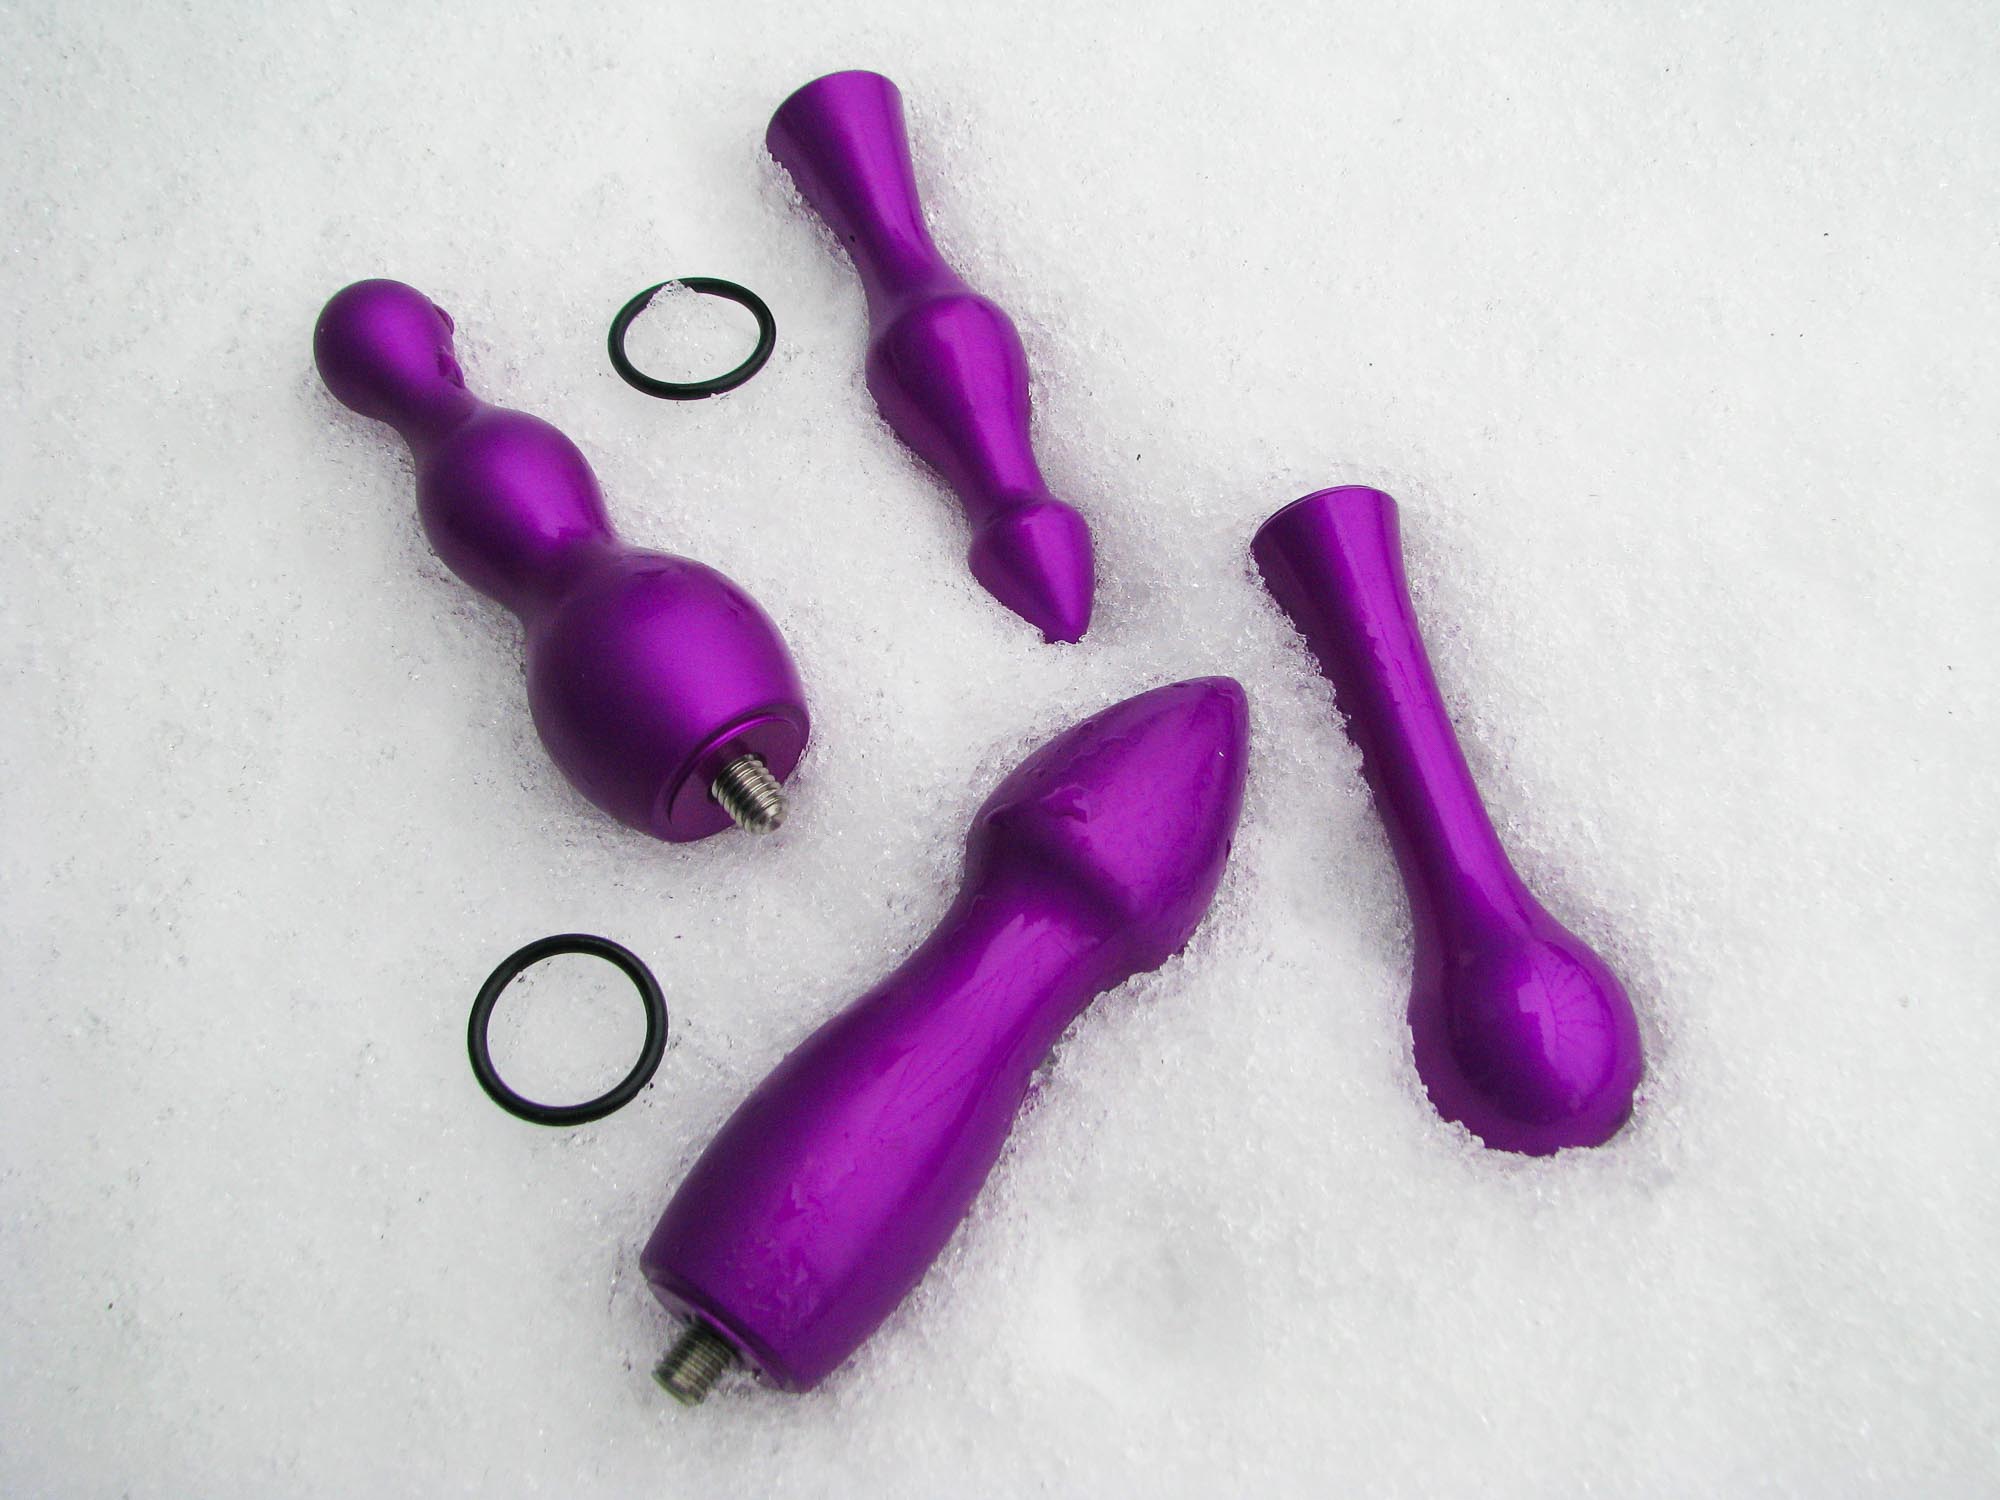 Tantus Alumina Motion and Revolve in pieces in the snow.